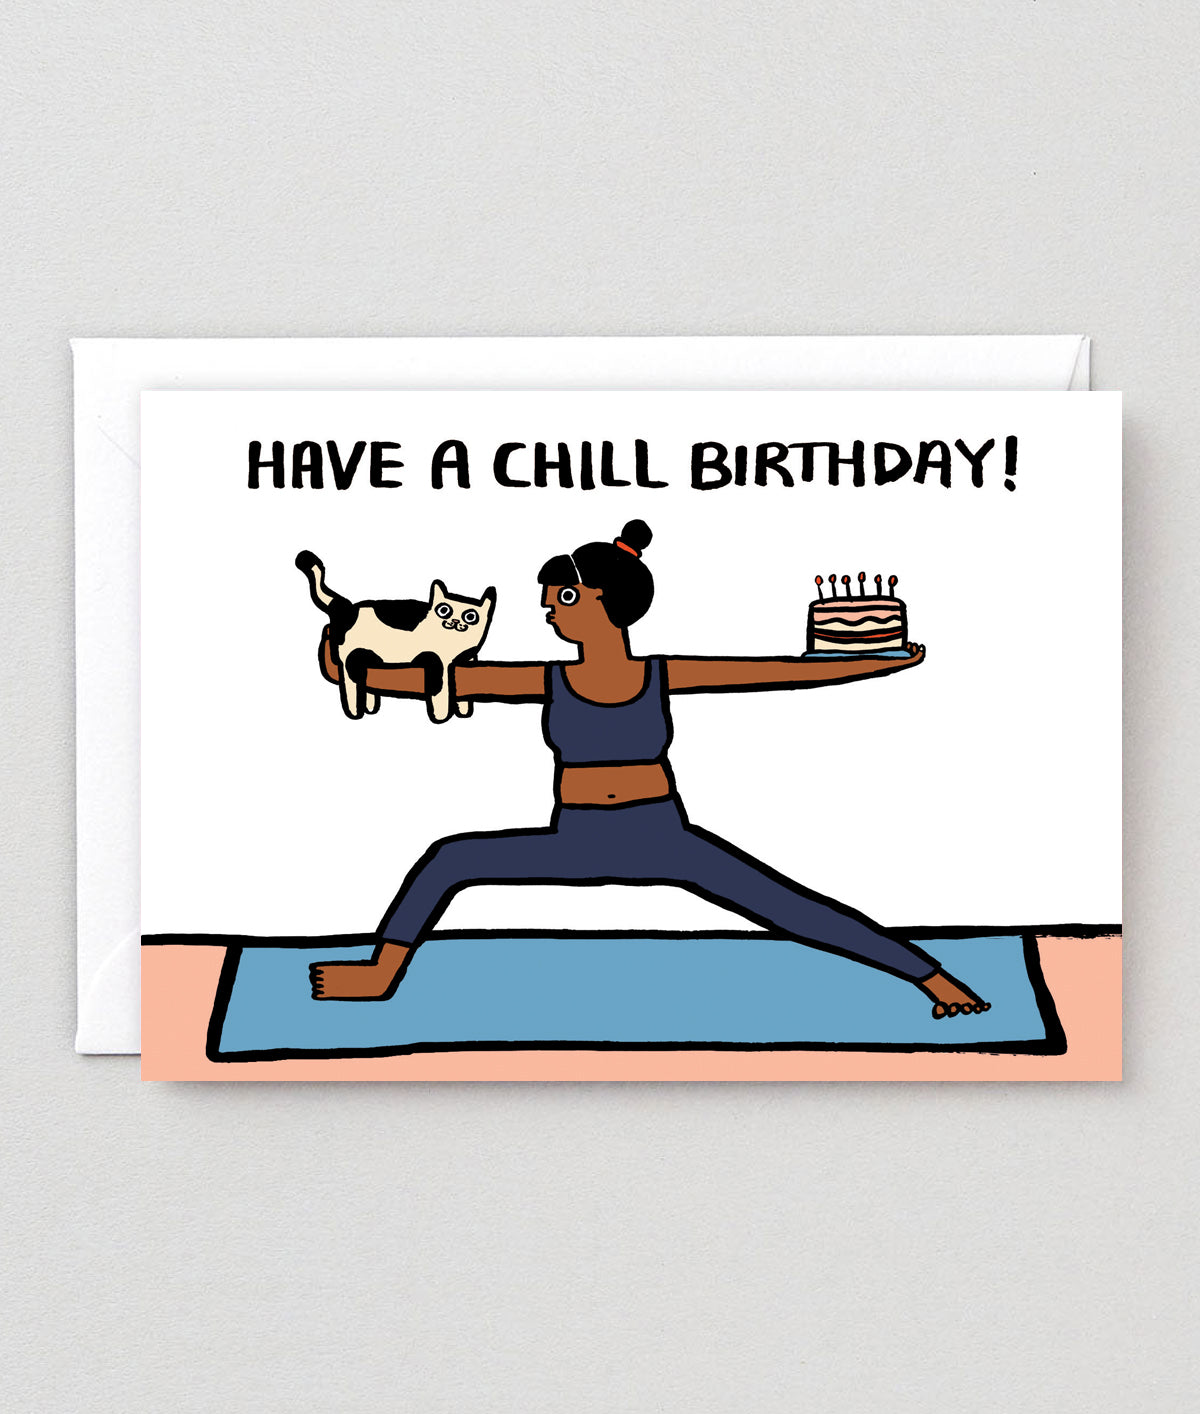 Have A Chill Birthday Greetings Card